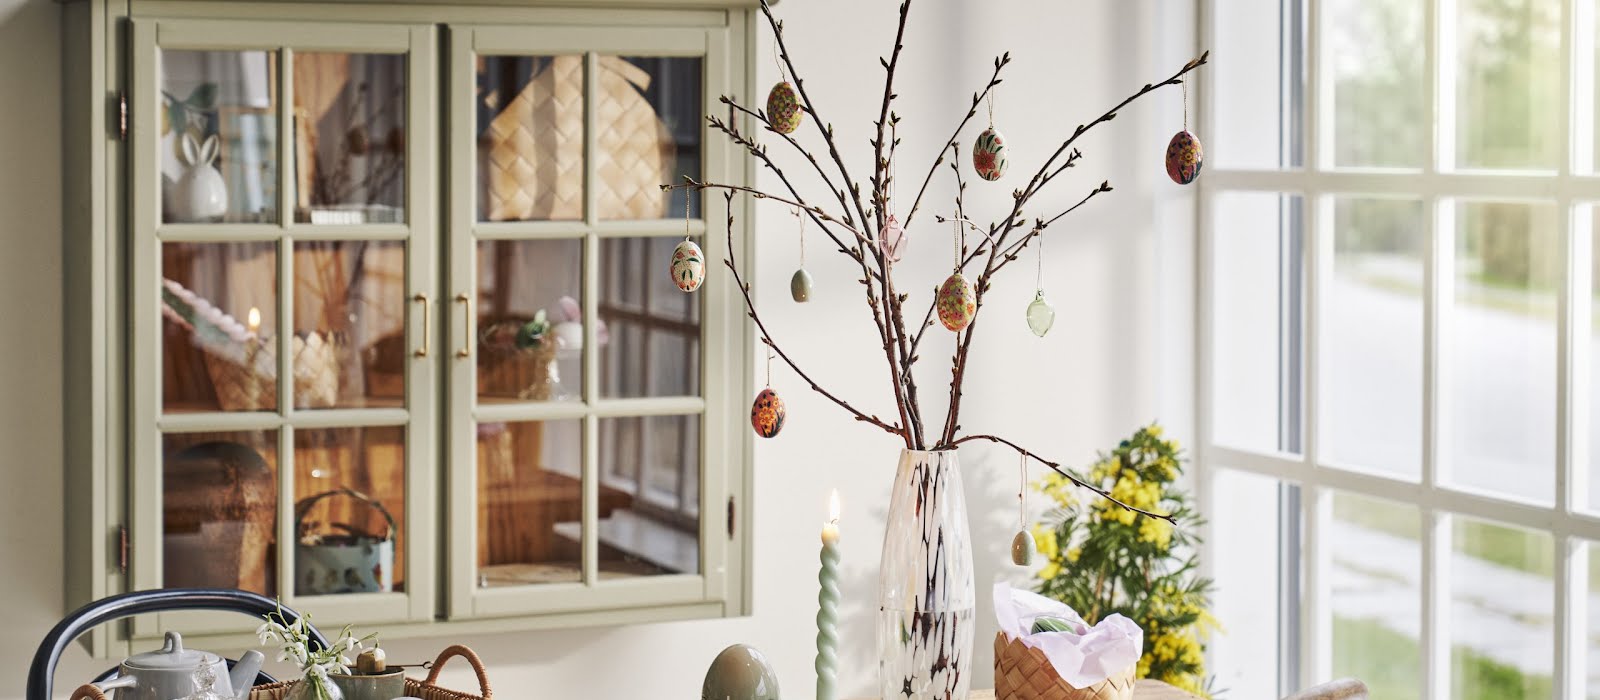 Adorable Easter decorations to brighten up your home this week